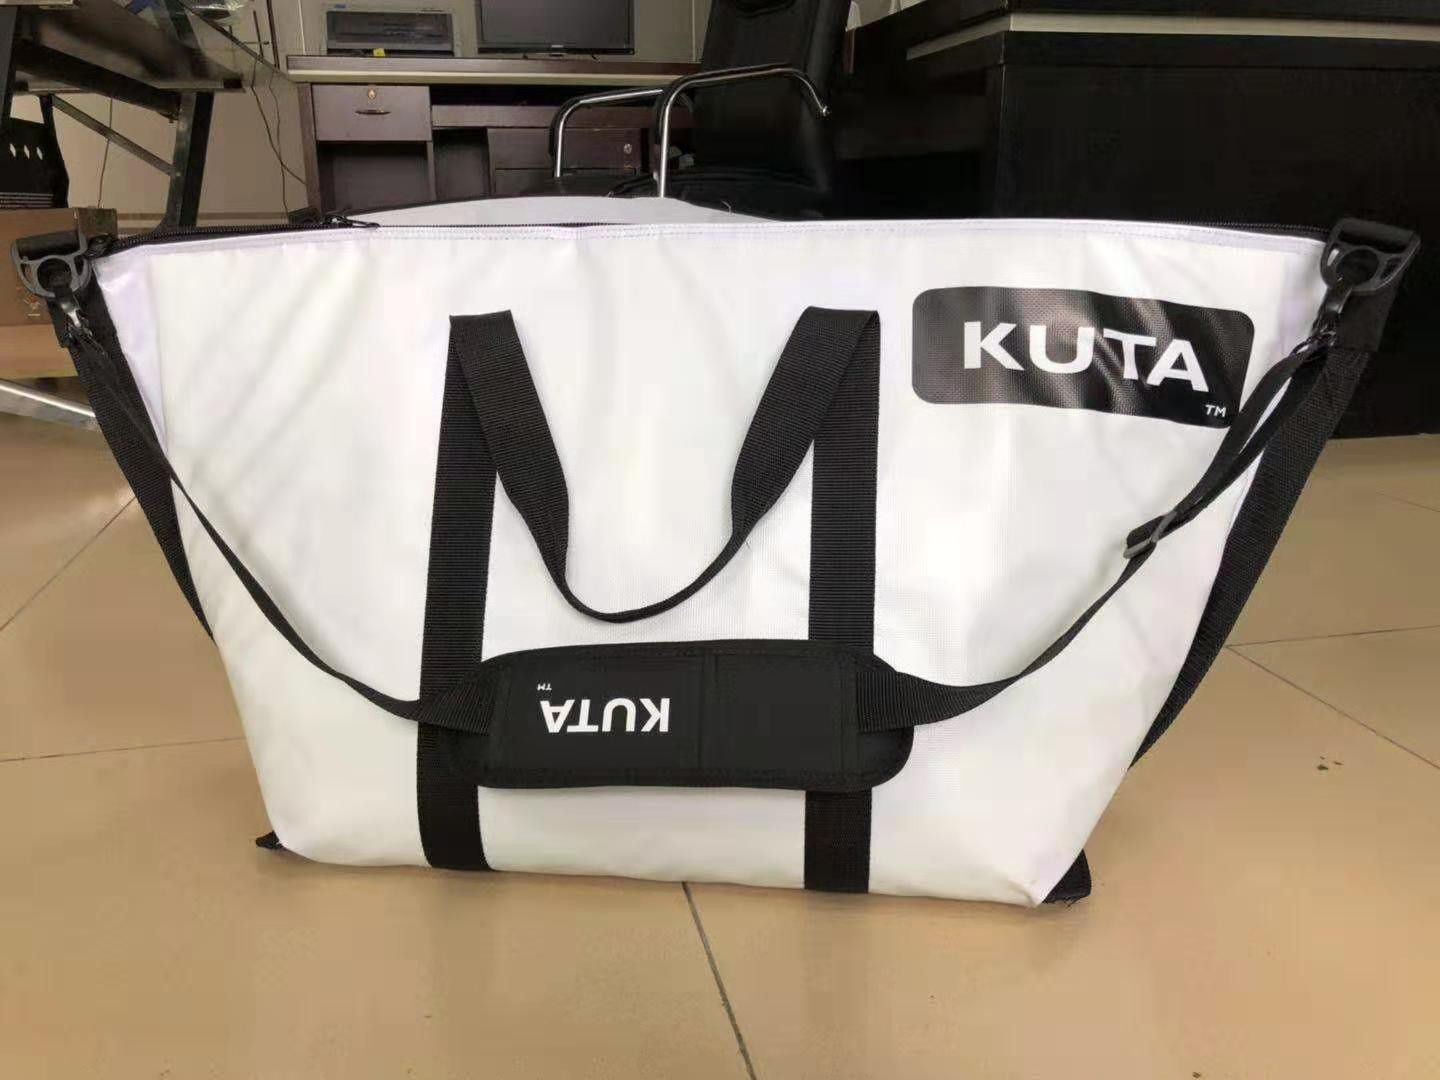 🔥🔥🔥KUTA 1/2 INCH THICK 45 LITER INSULATED COOLER BAG🔥🔥🔥